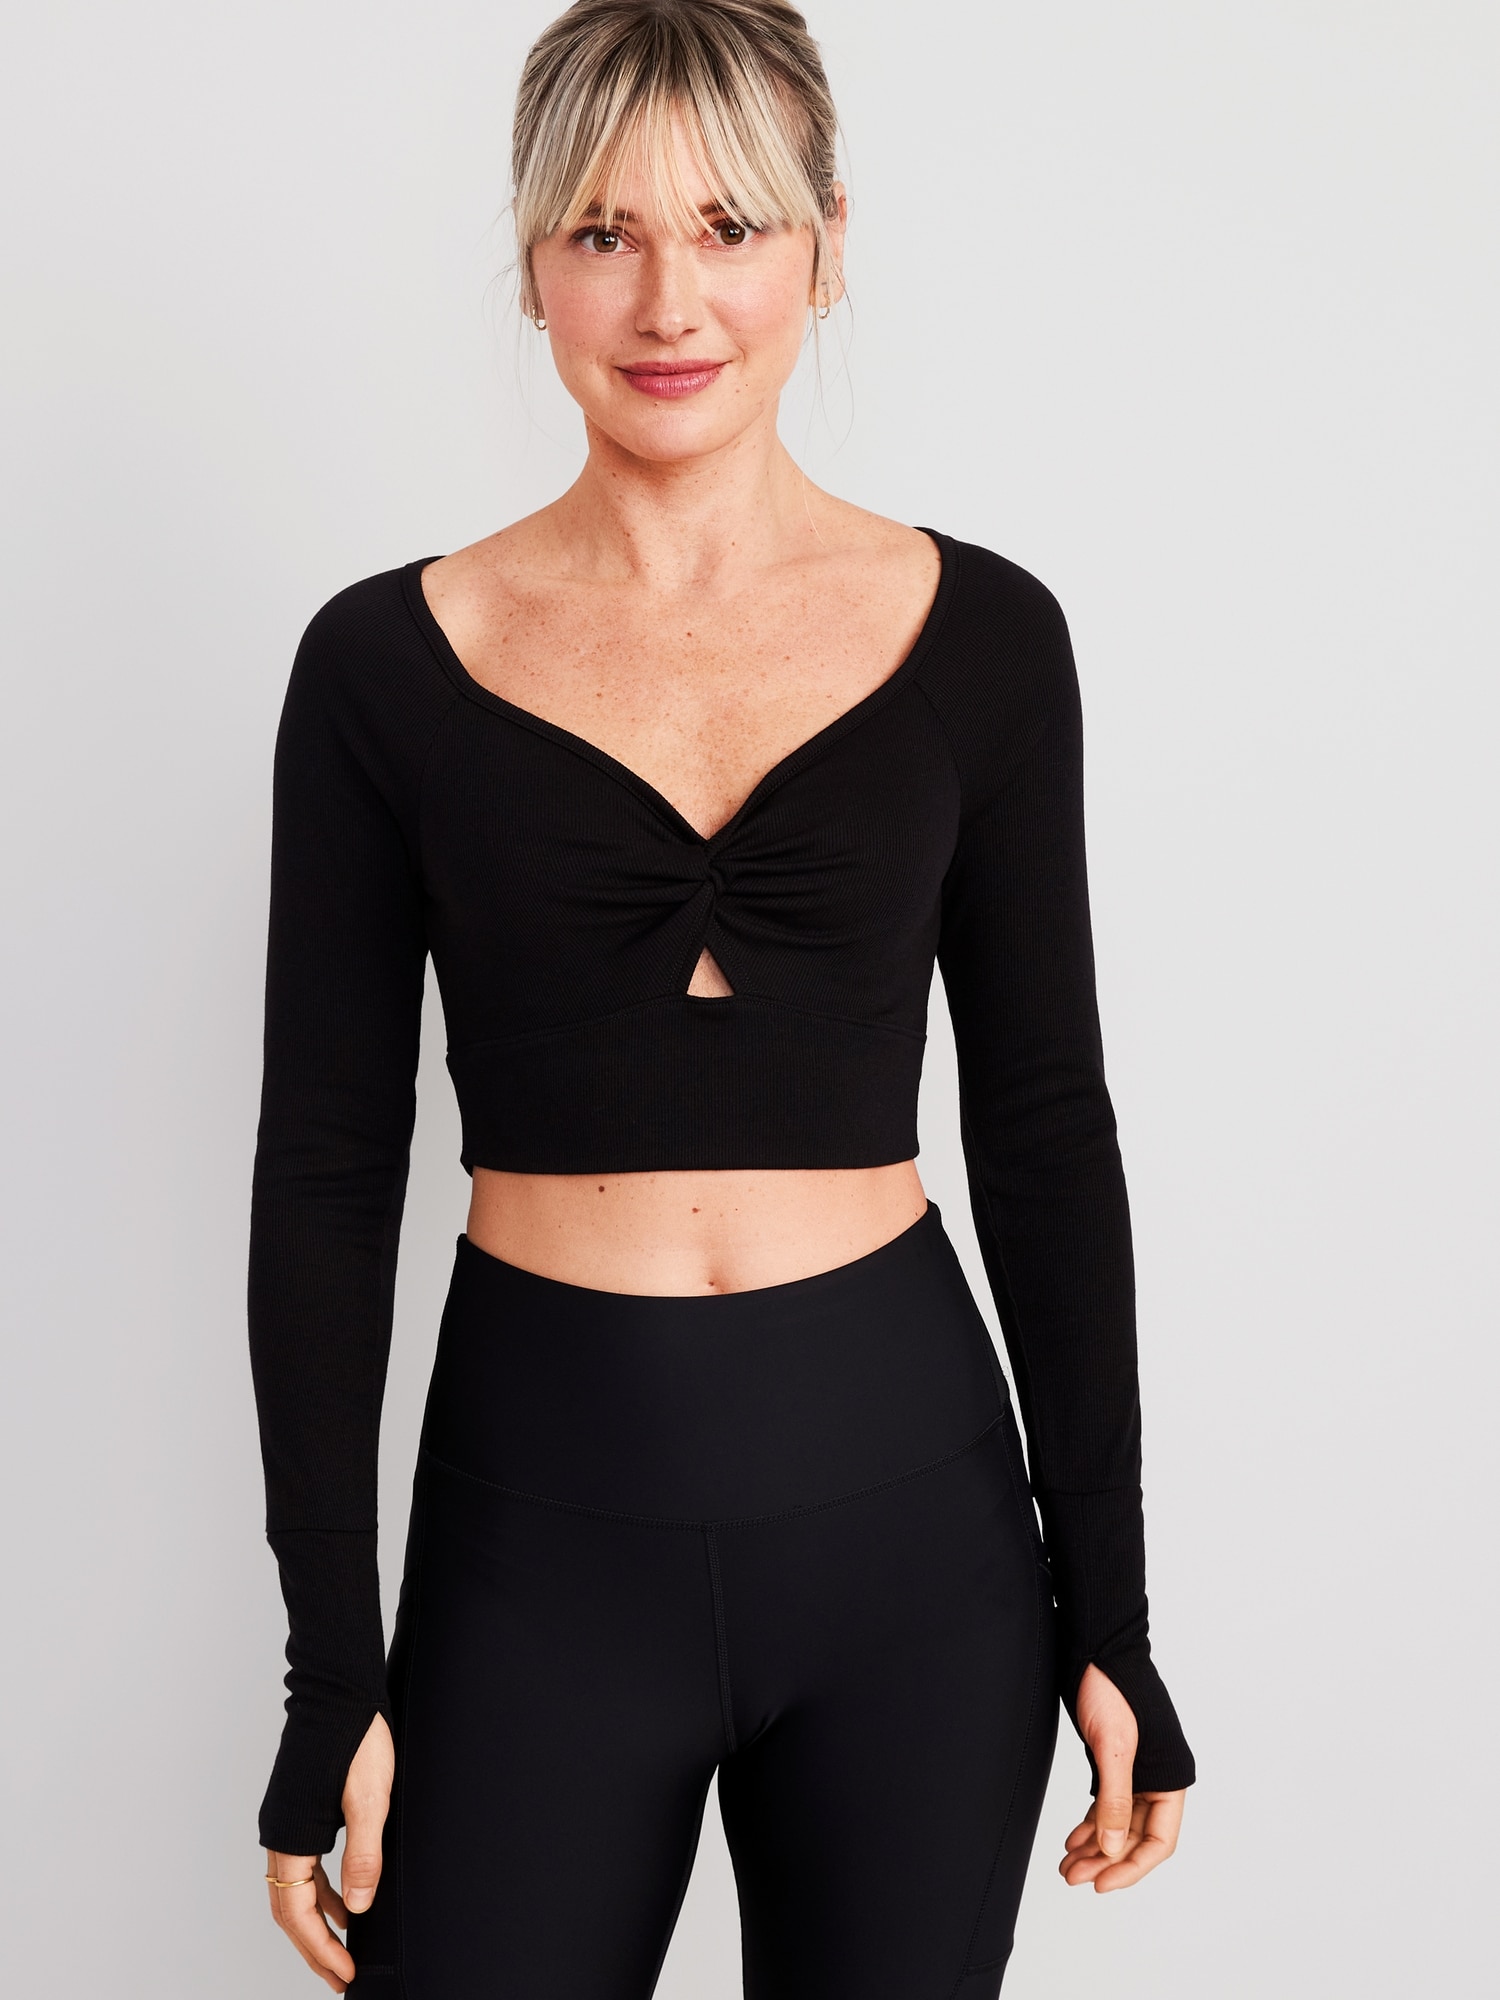 Old Navy UltraLite Rib-Knit Cropped Twist-Front Shrug Top for Women black. 1